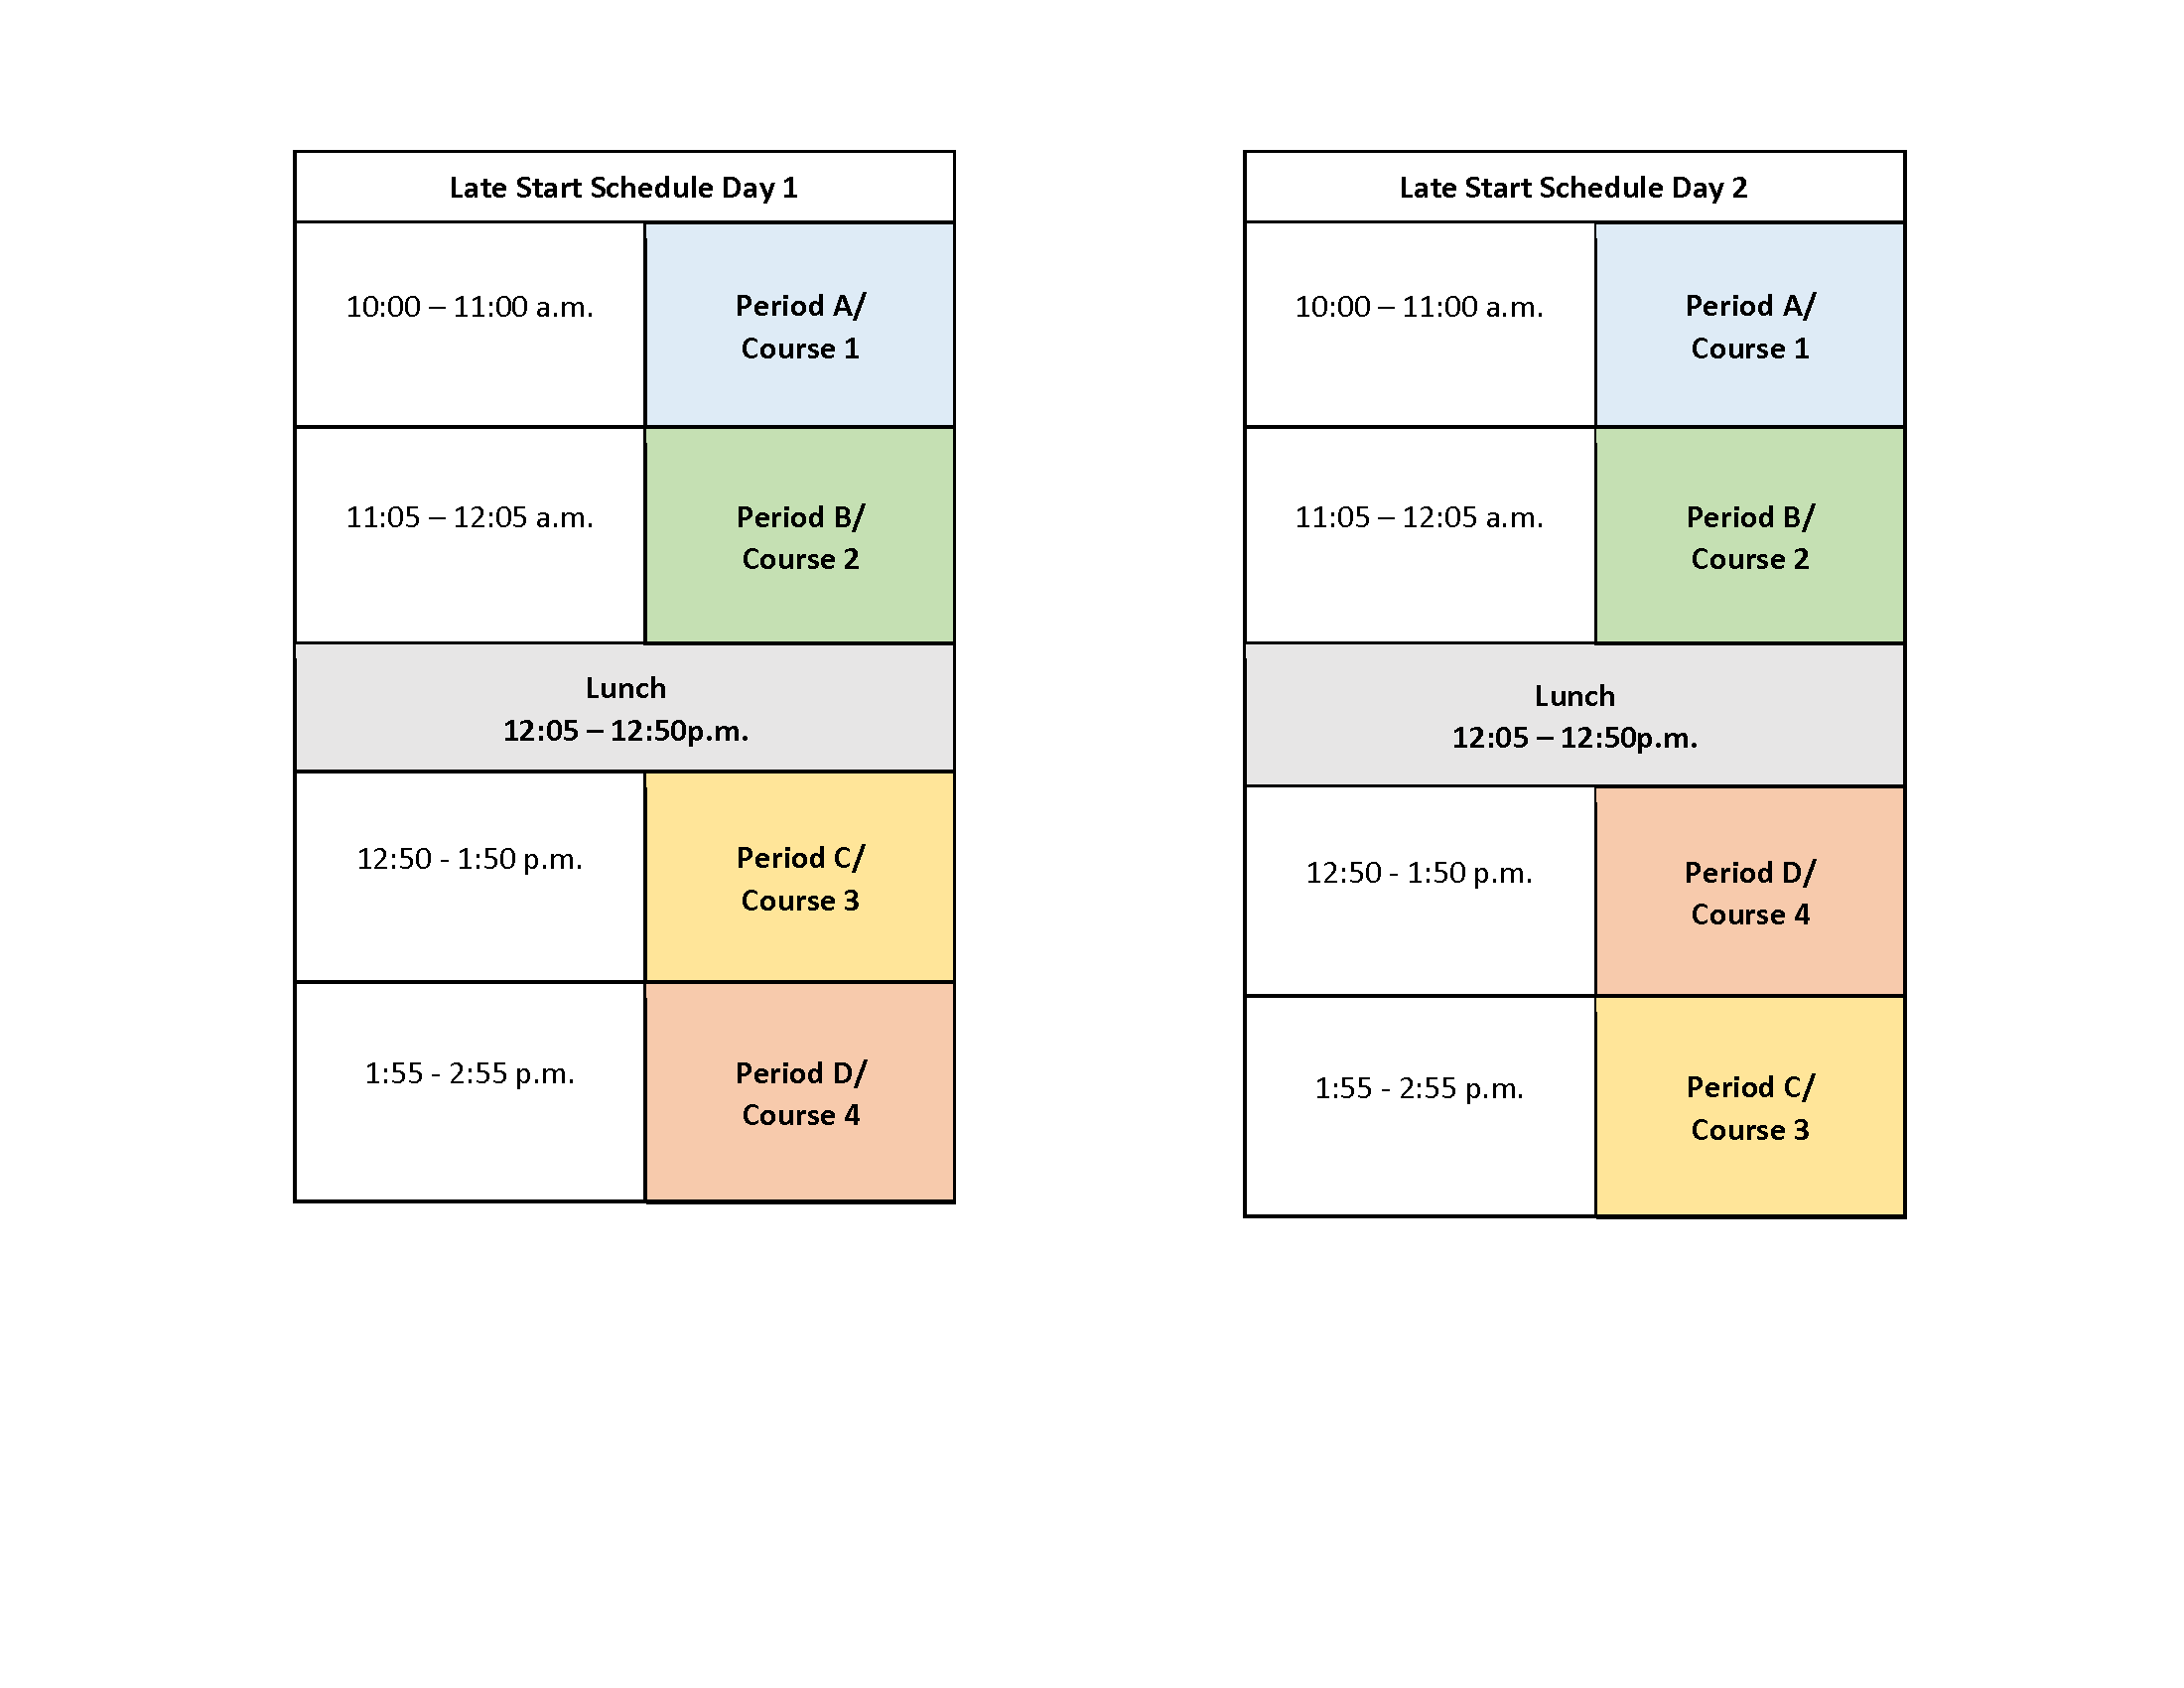 Semester 2 Daily Timetable 2021-2022 - Late Start